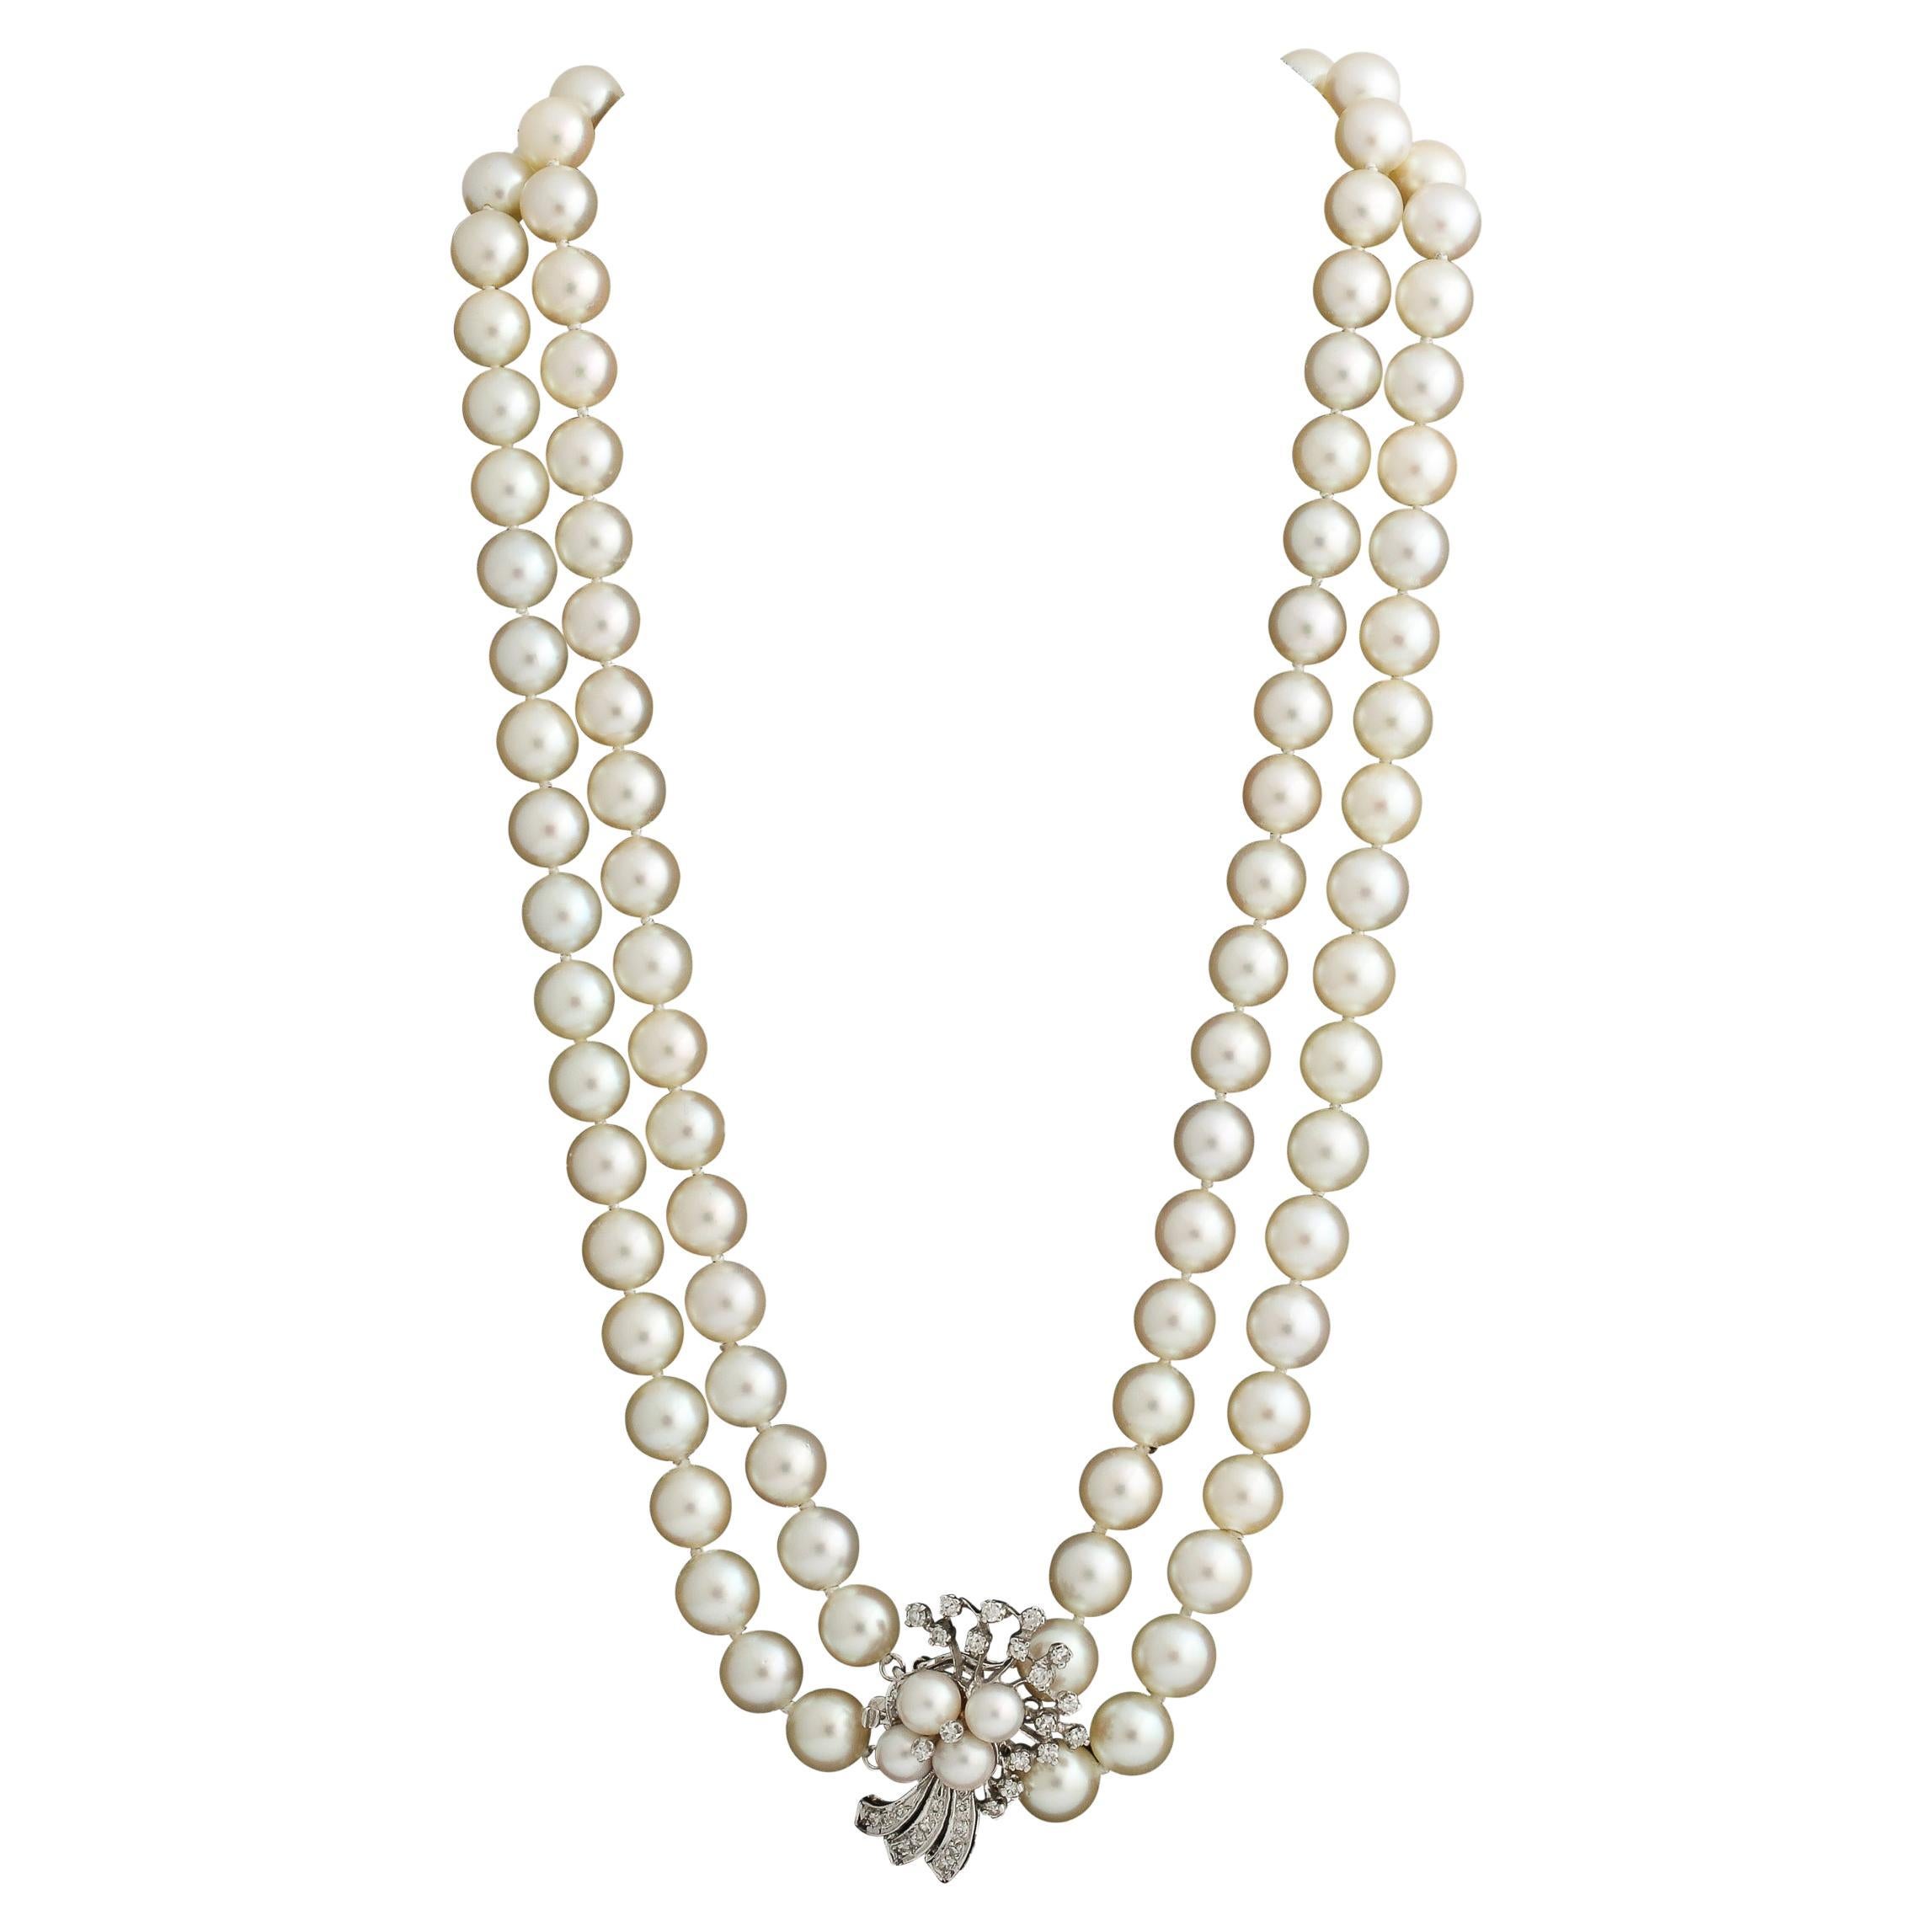 Double Strand Pearl Necklace with A White Gold , Diamond & Pearl Clasp